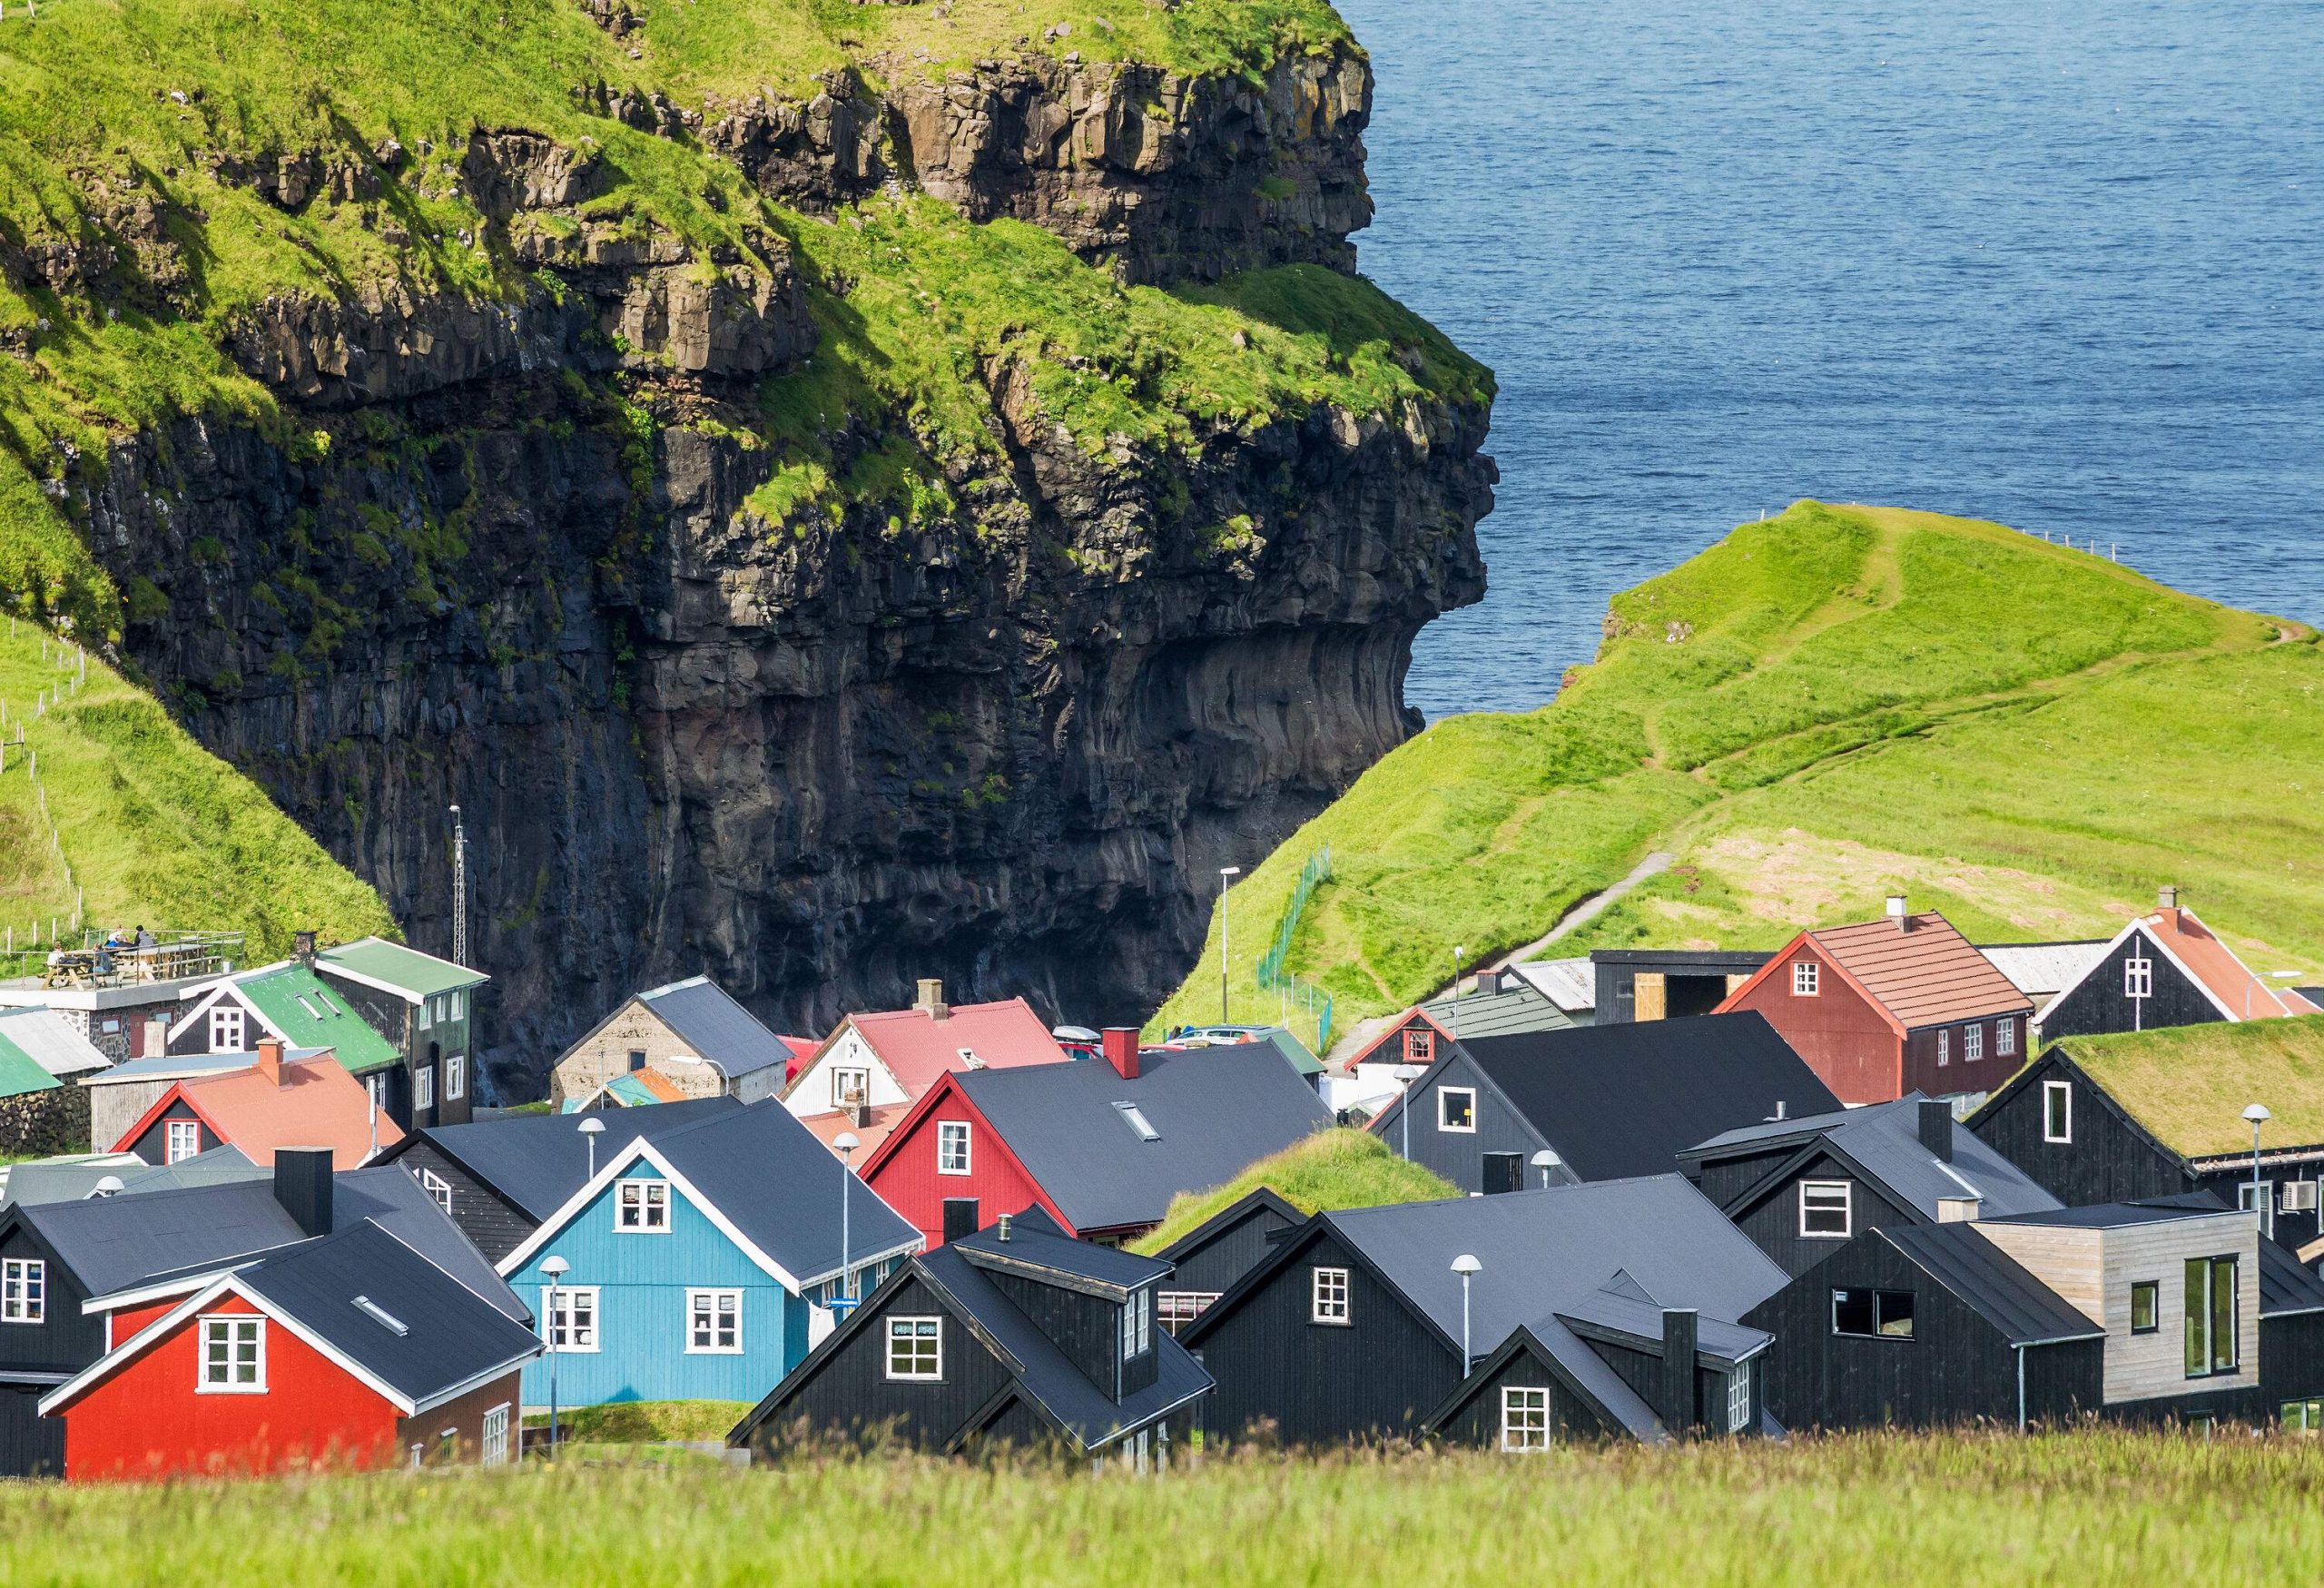 A green cliff topped with colourful houses overlooking the sea.